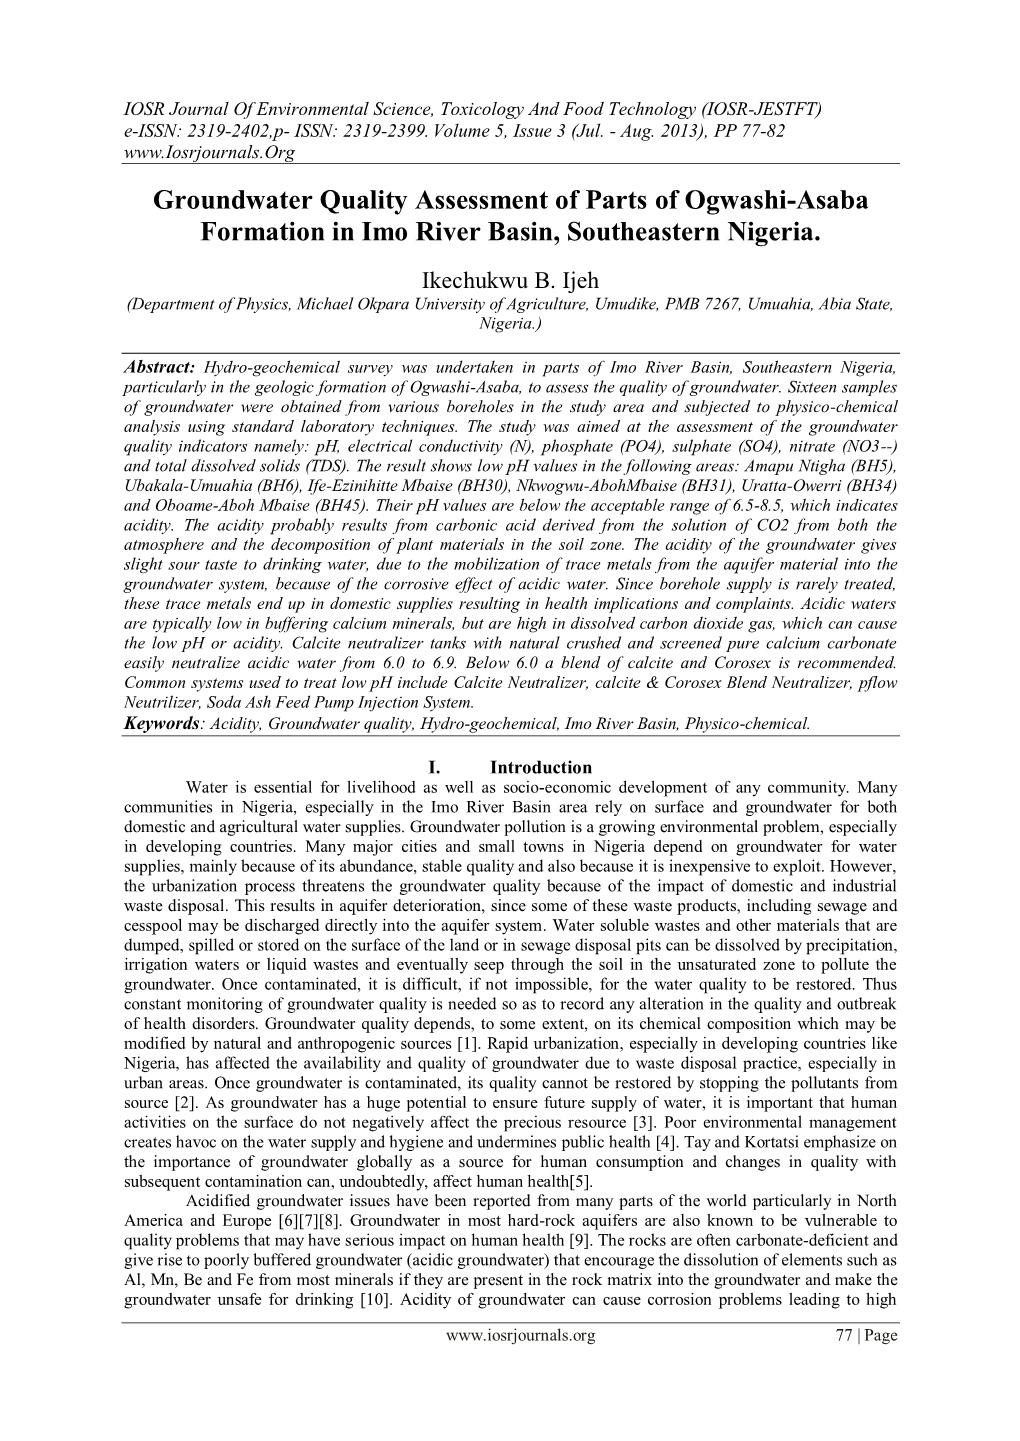 Groundwater Quality Assessment of Parts of Ogwashi-Asaba Formation in Imo River Basin, Southeastern Nigeria